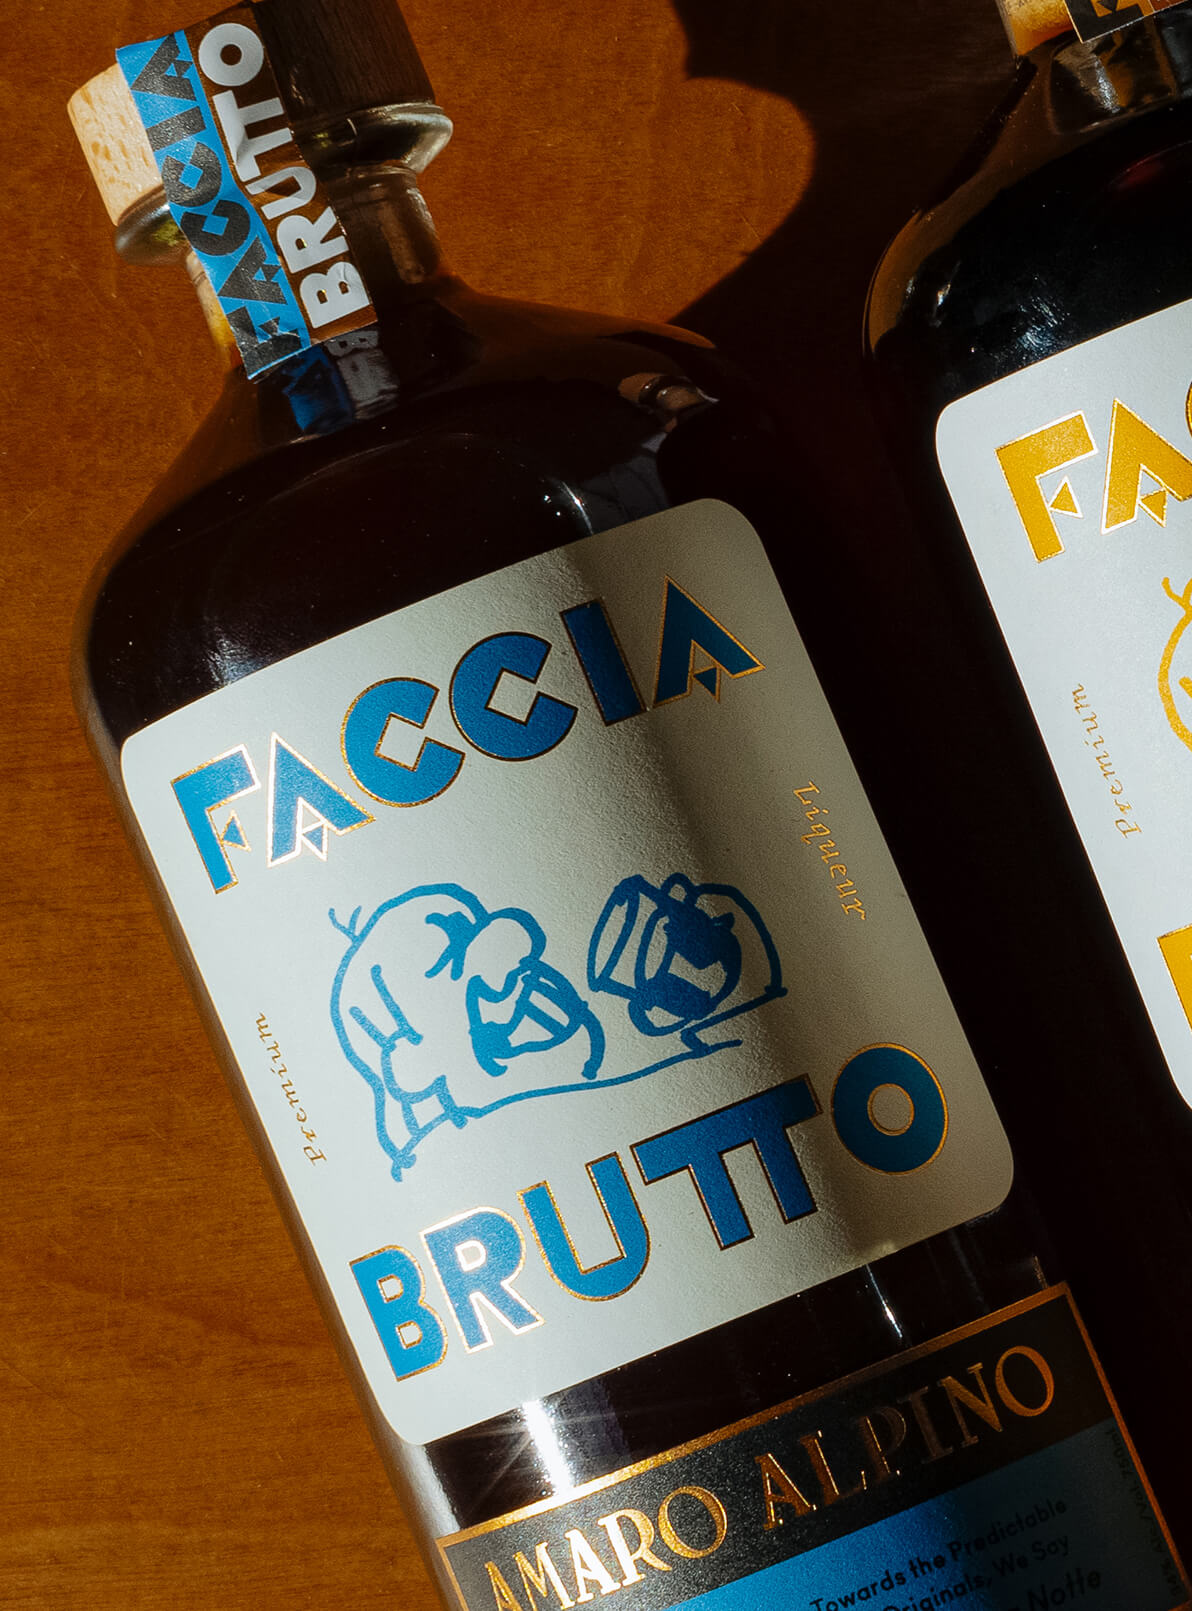 Bottle of Faccia Brutto Amaro Alpino laying down on wood background